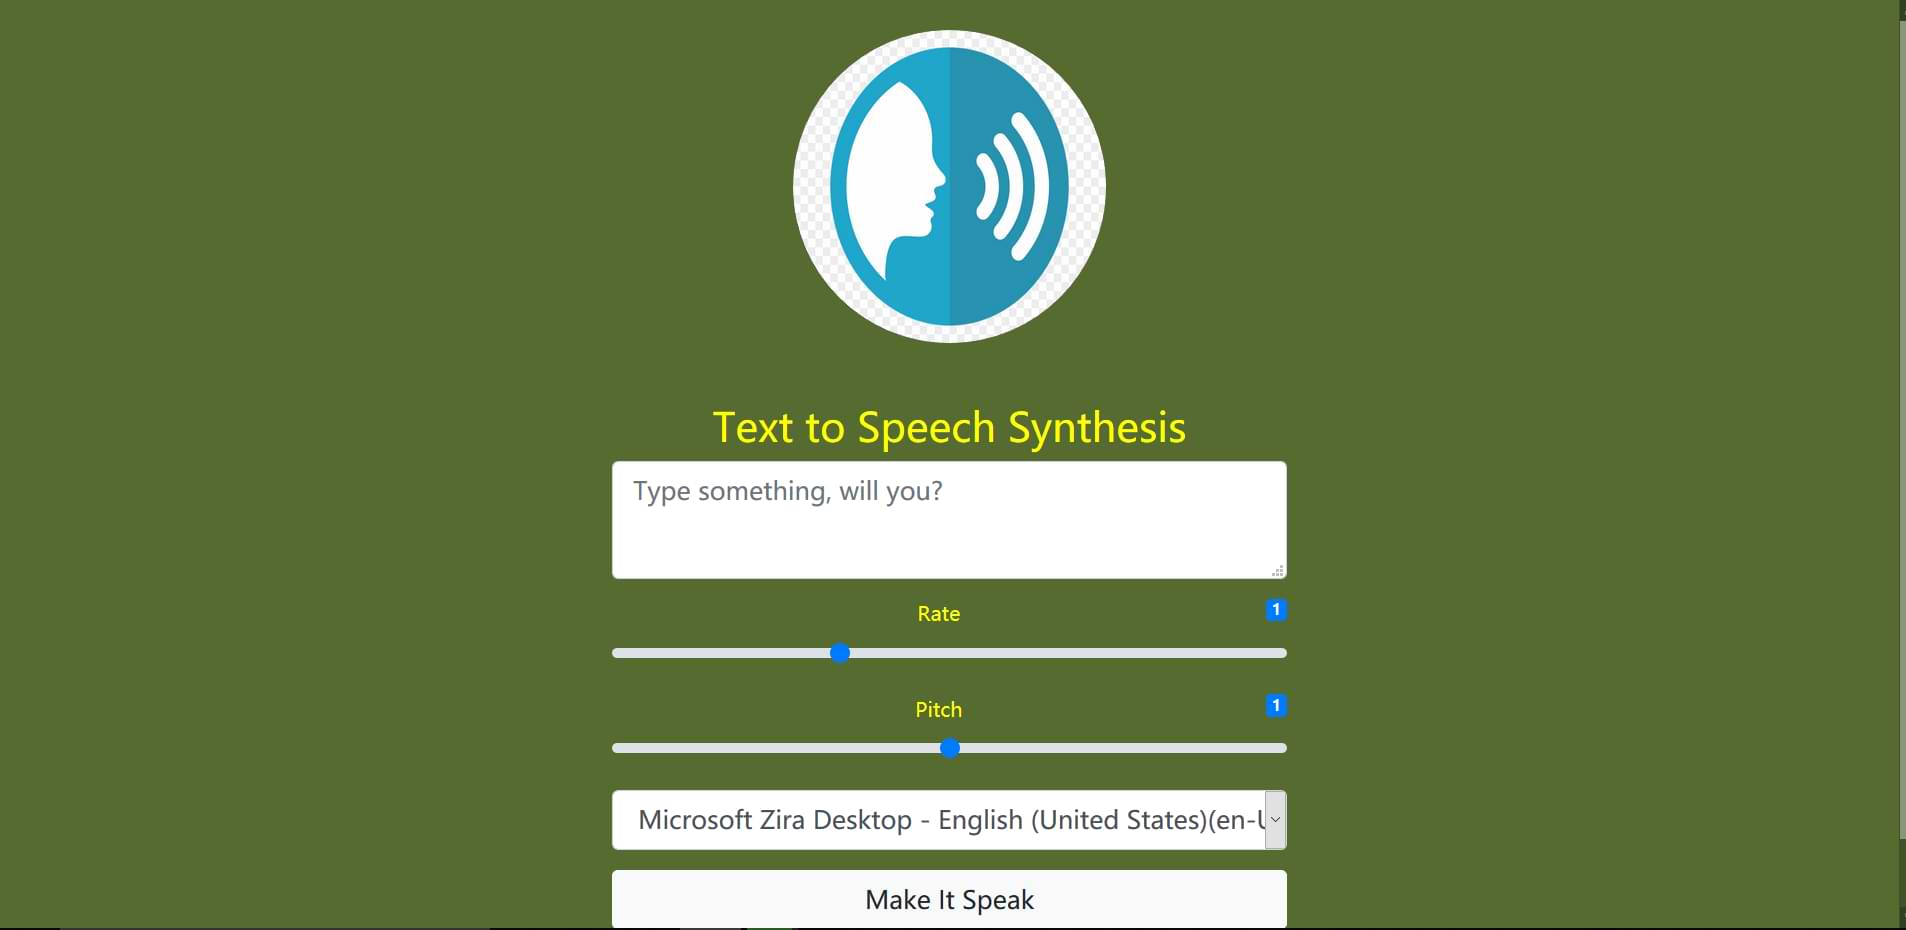 Text-to-Speech Synthesis